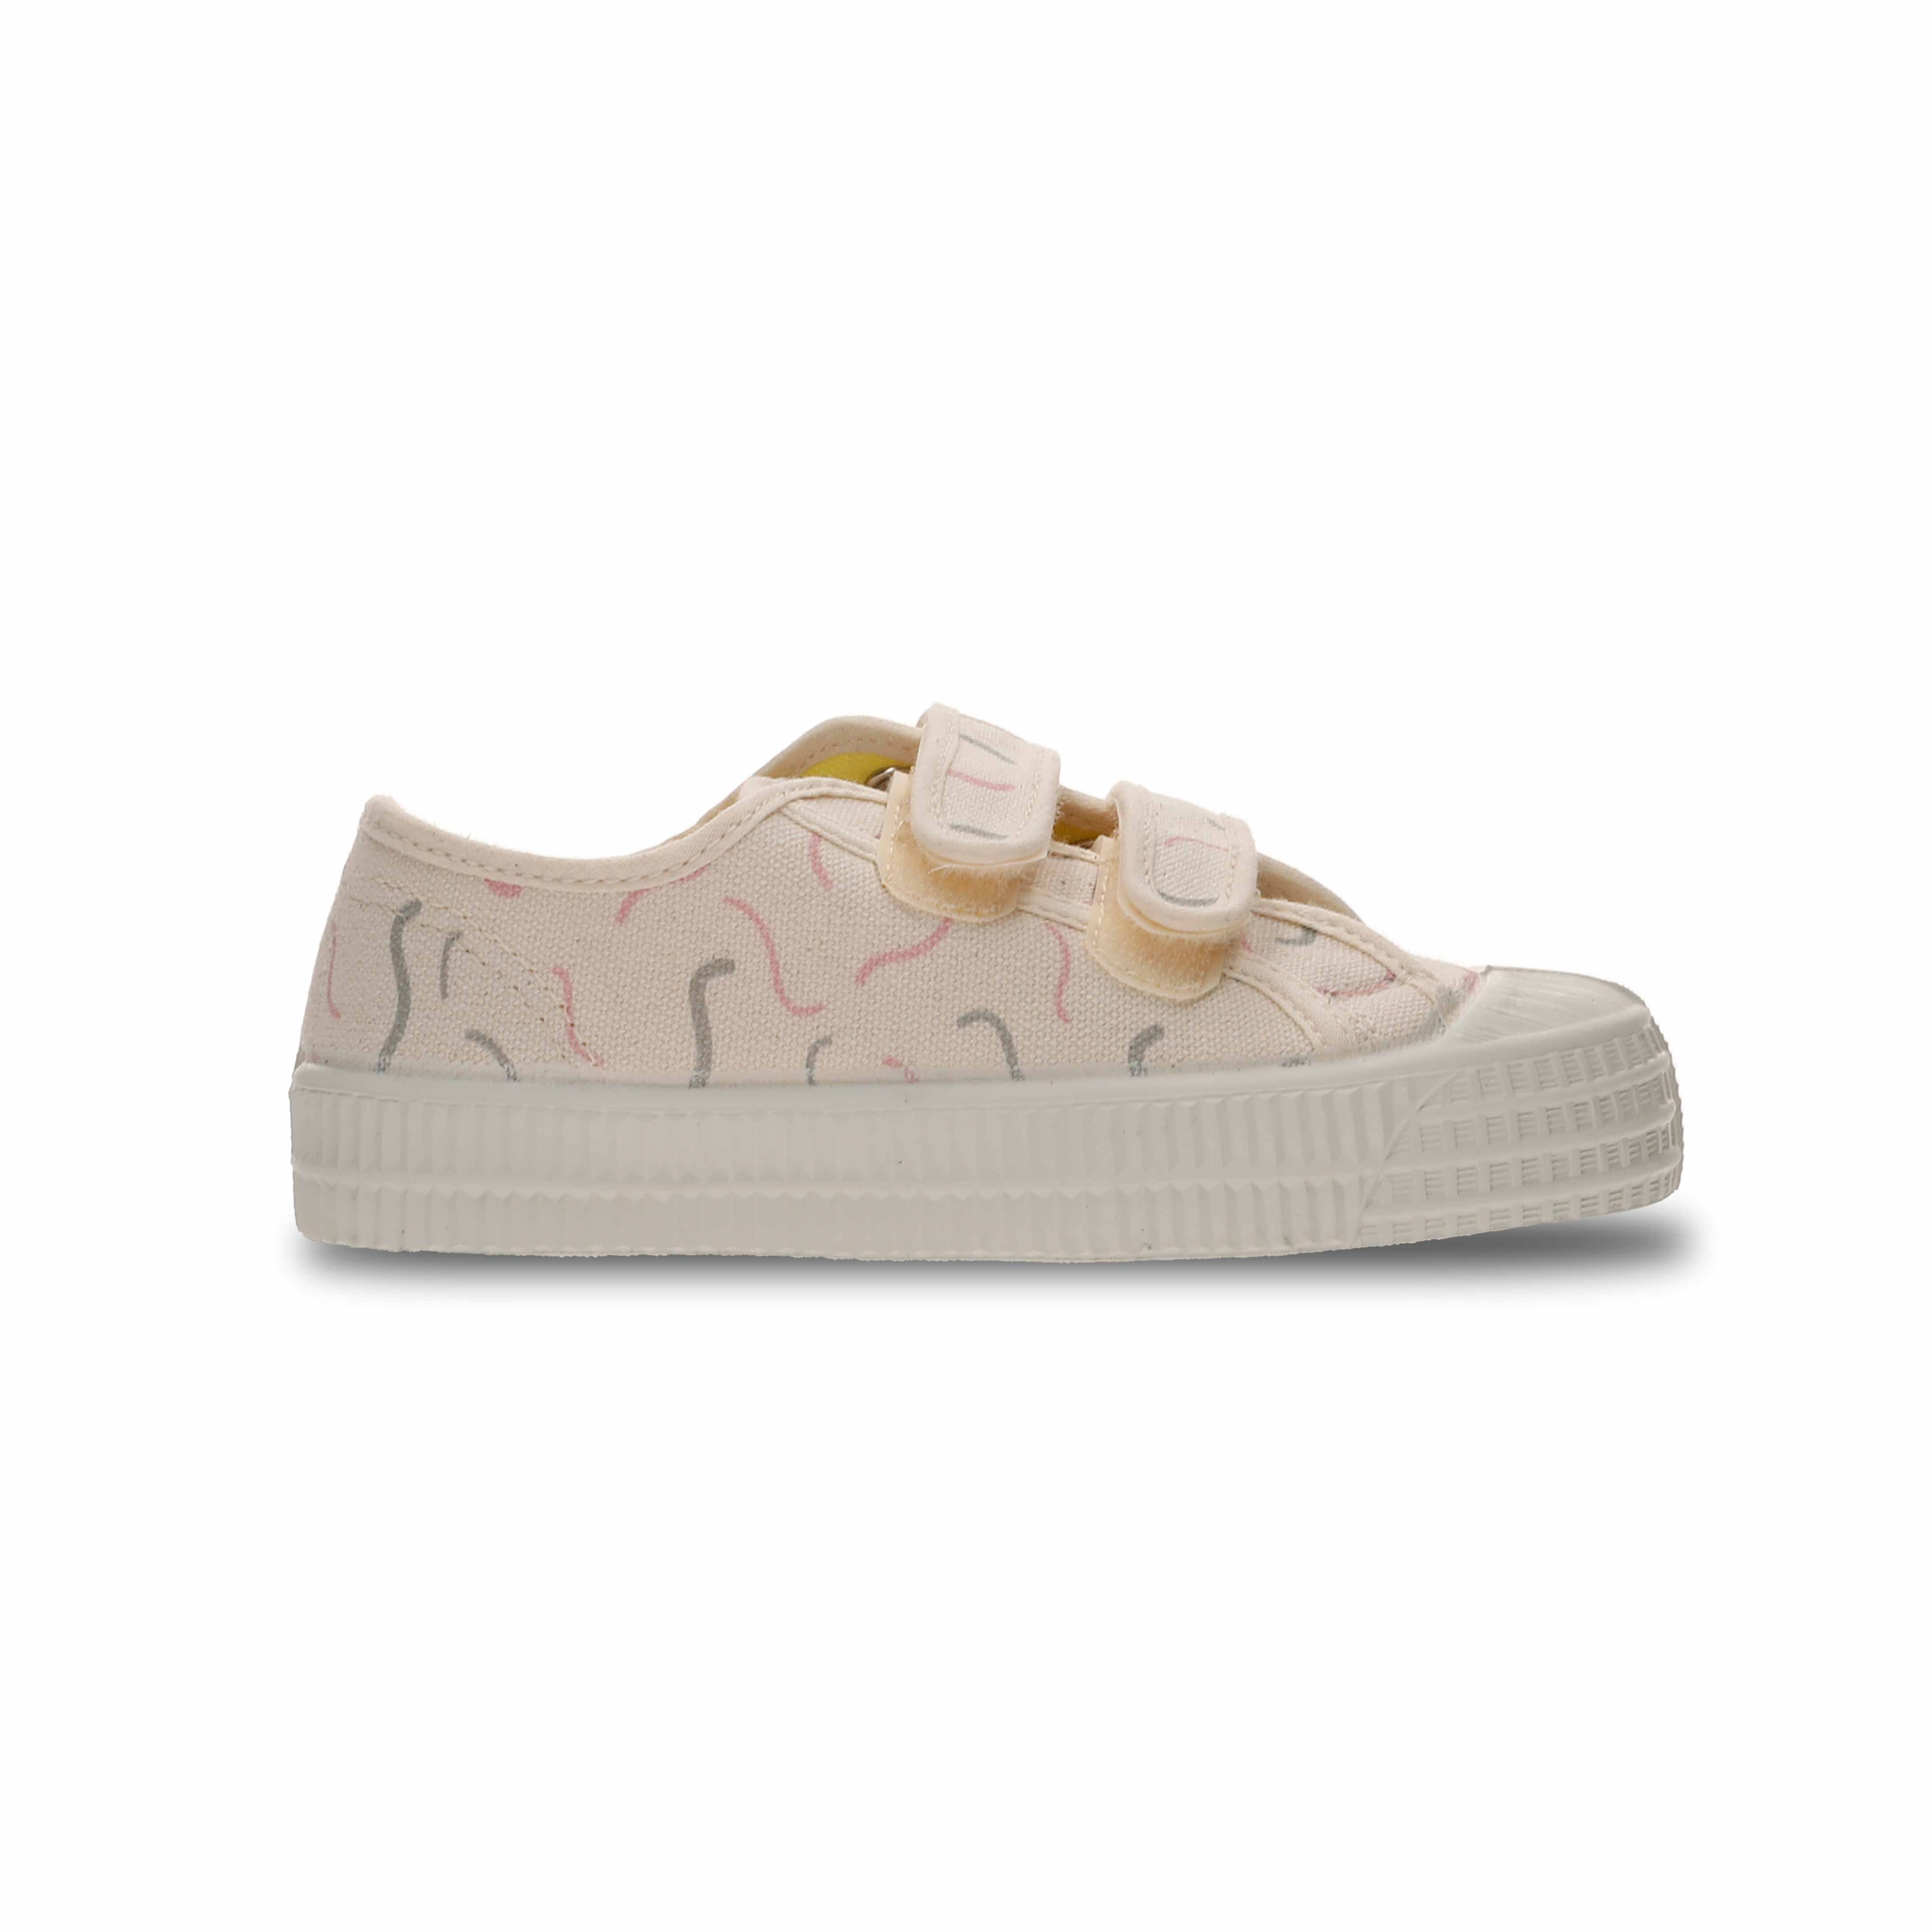 Boys & Girls Light Pink Printed Canvas Shoes